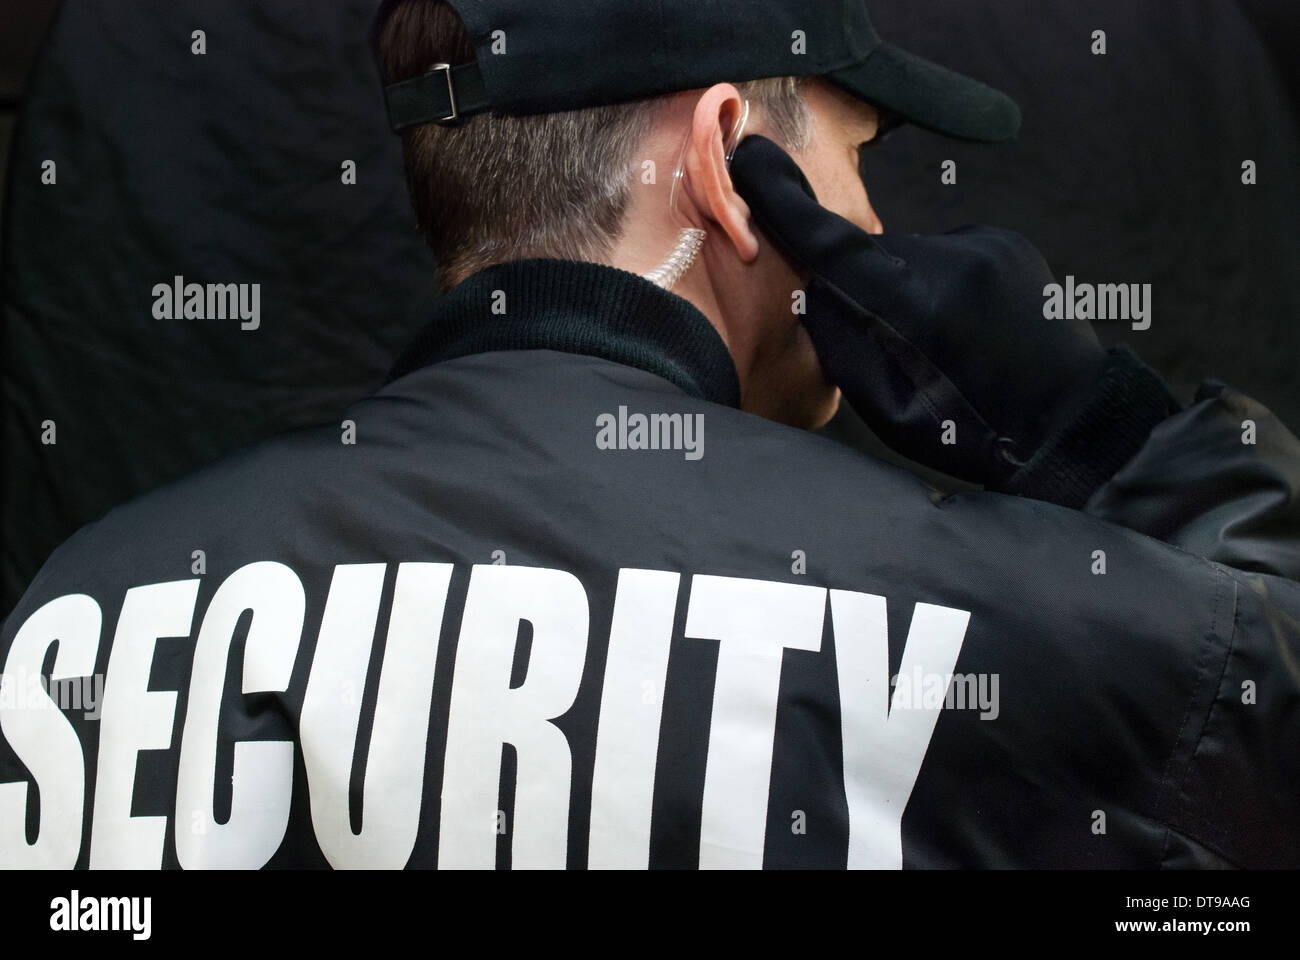 Close-up of a security guard listening to his earpiece. Back of jacket showing. Stock Photo